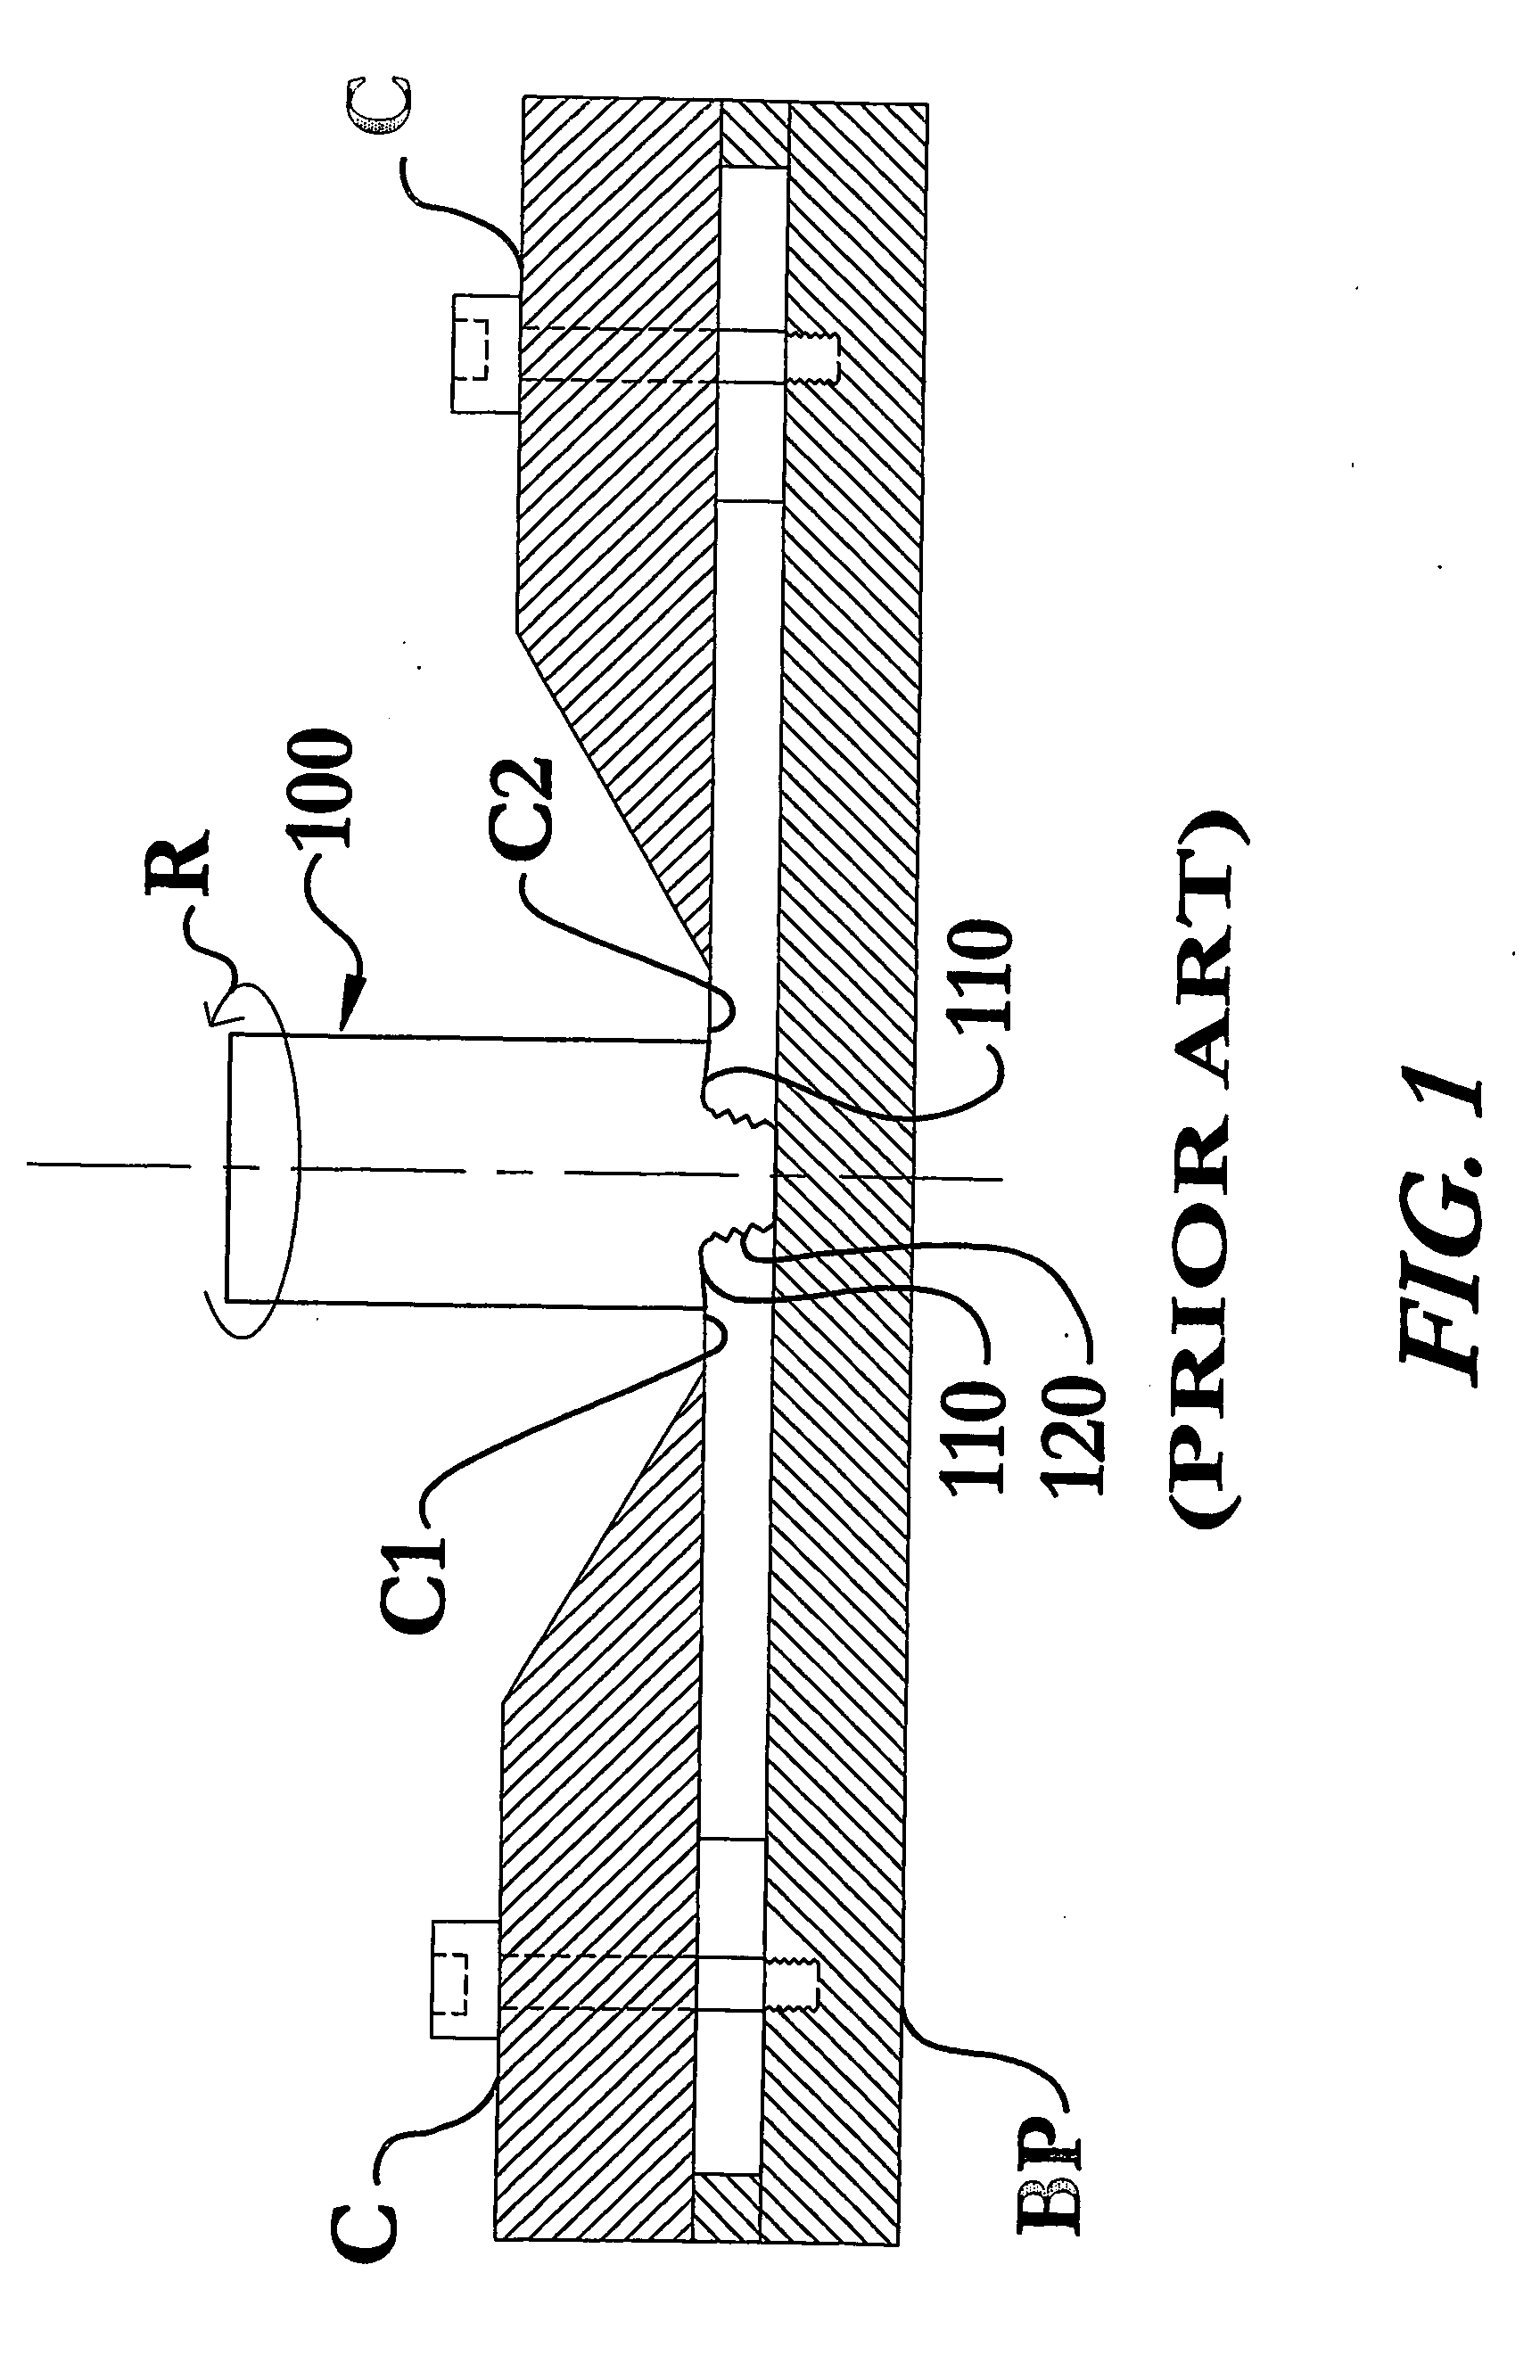 Method and apparatus for locally clamping components that are to be joined by friction stir welding